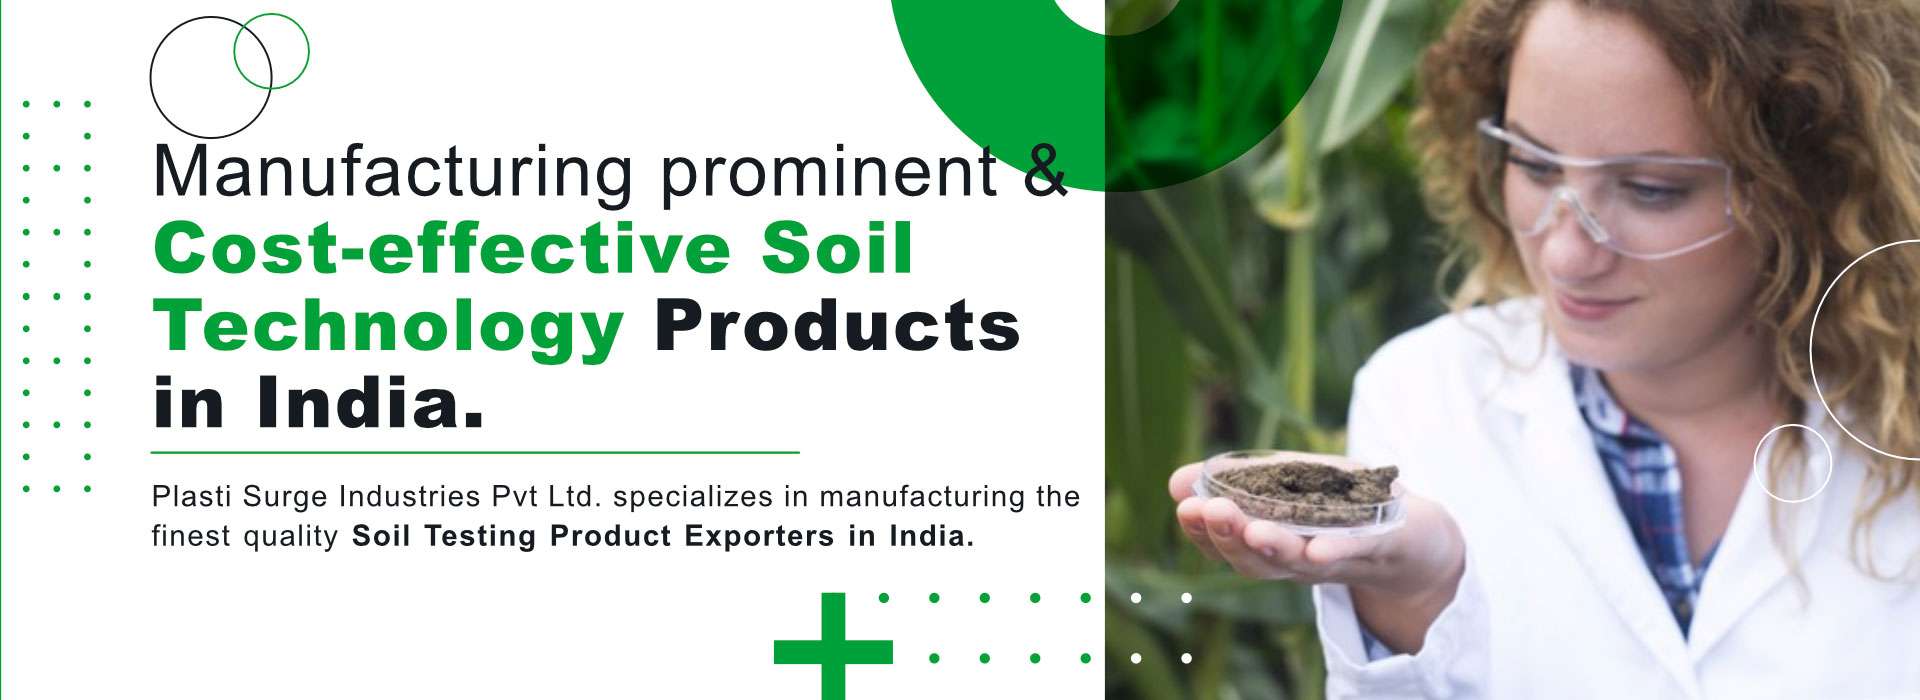  Manufacturing prominent & cost effective Soil Technology Products in India Manufacturers in Chennai